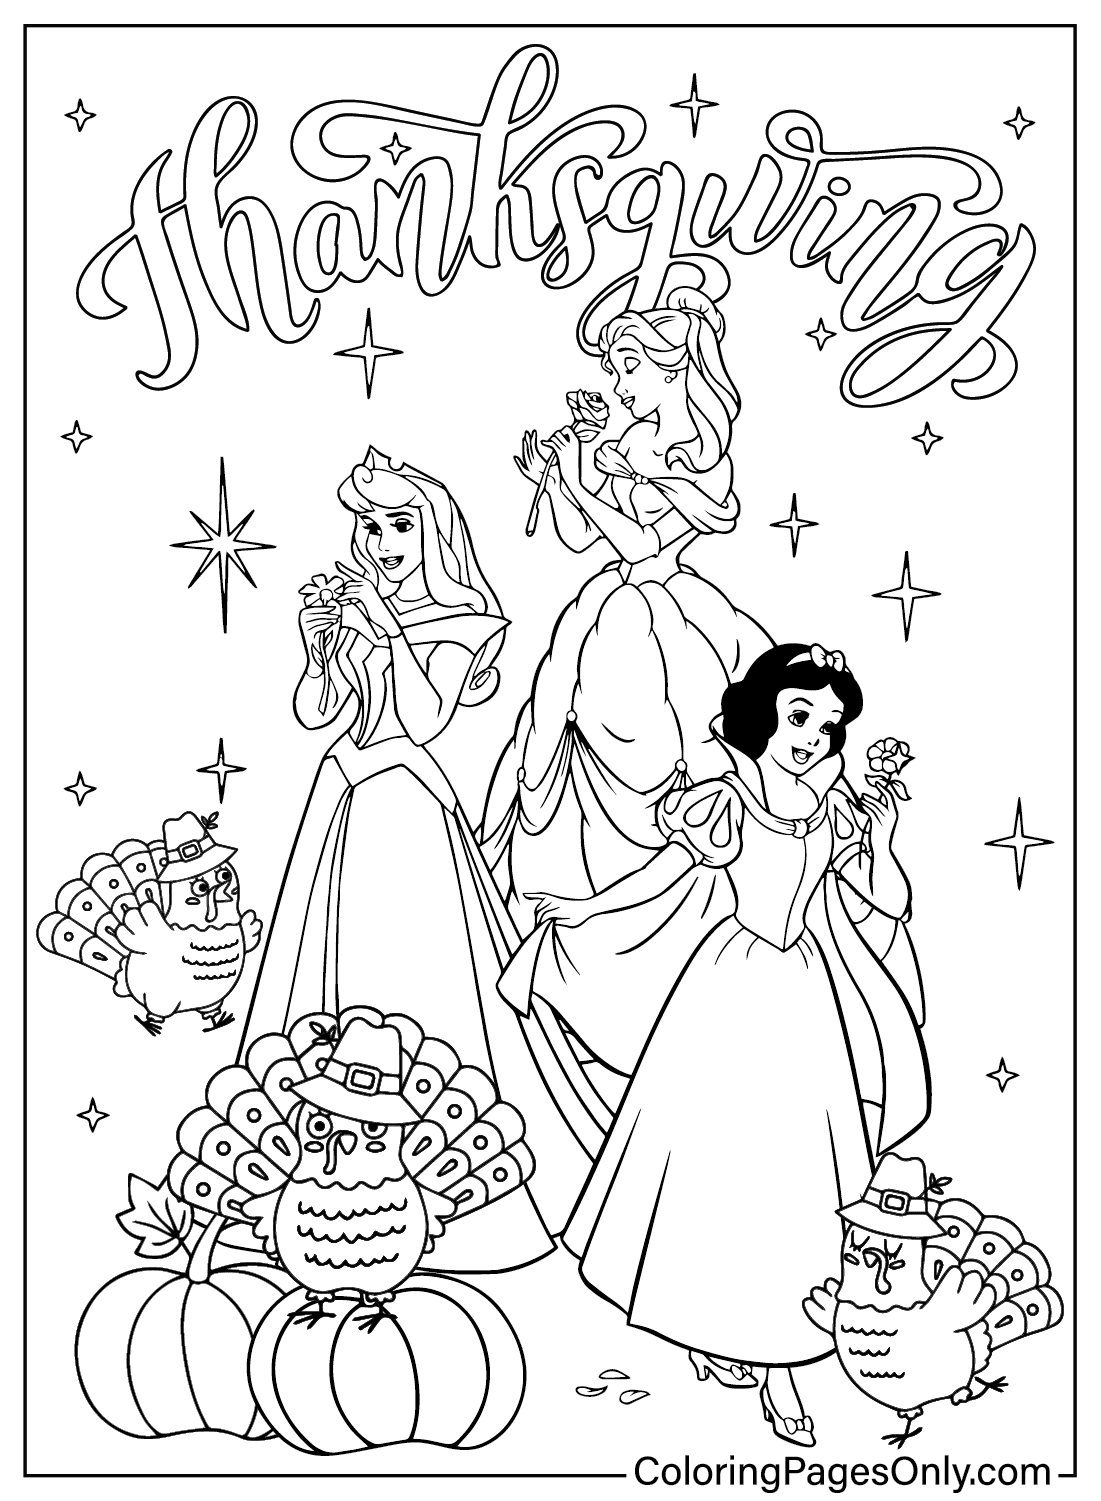 Disney Thanksgiving Coloring Page from Disney Thanksgiving